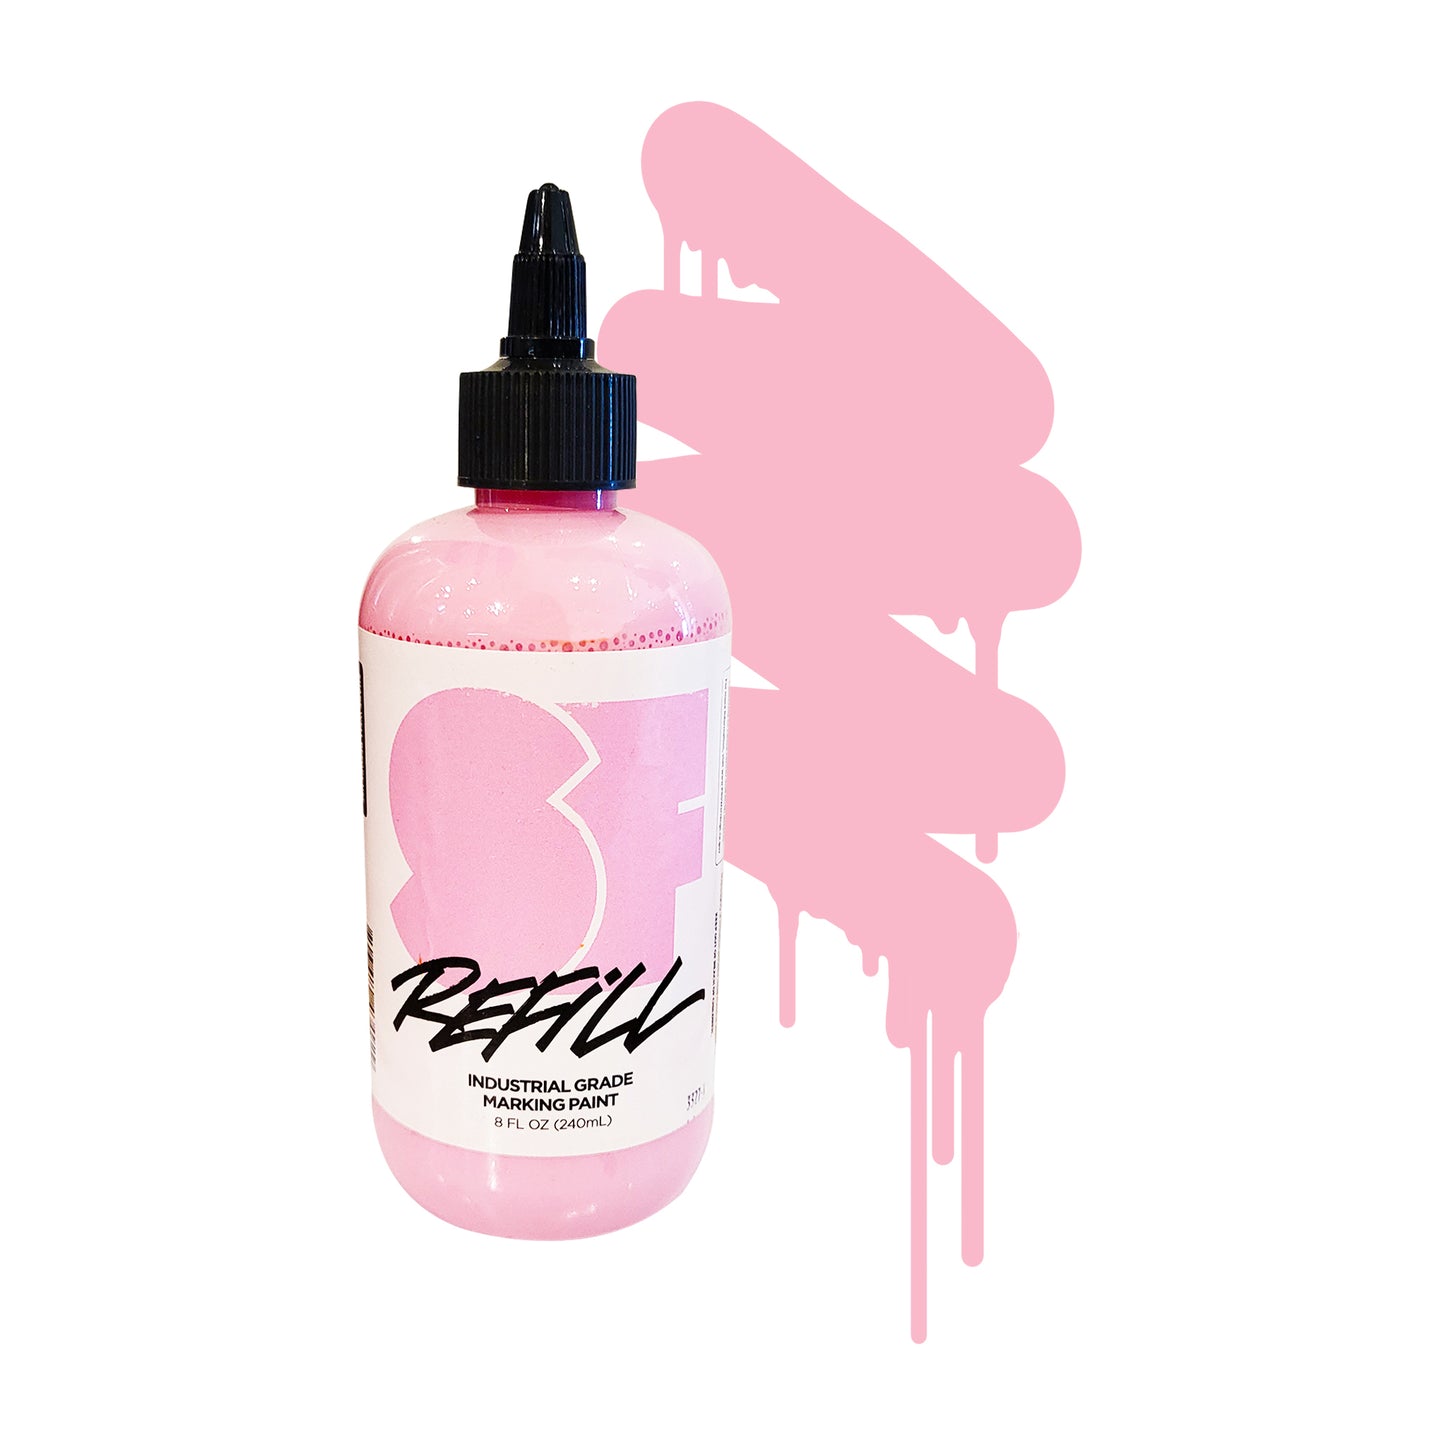 A clear bottle of baby pink paint/ink with a tapered lid and a color swatch to the right of it.